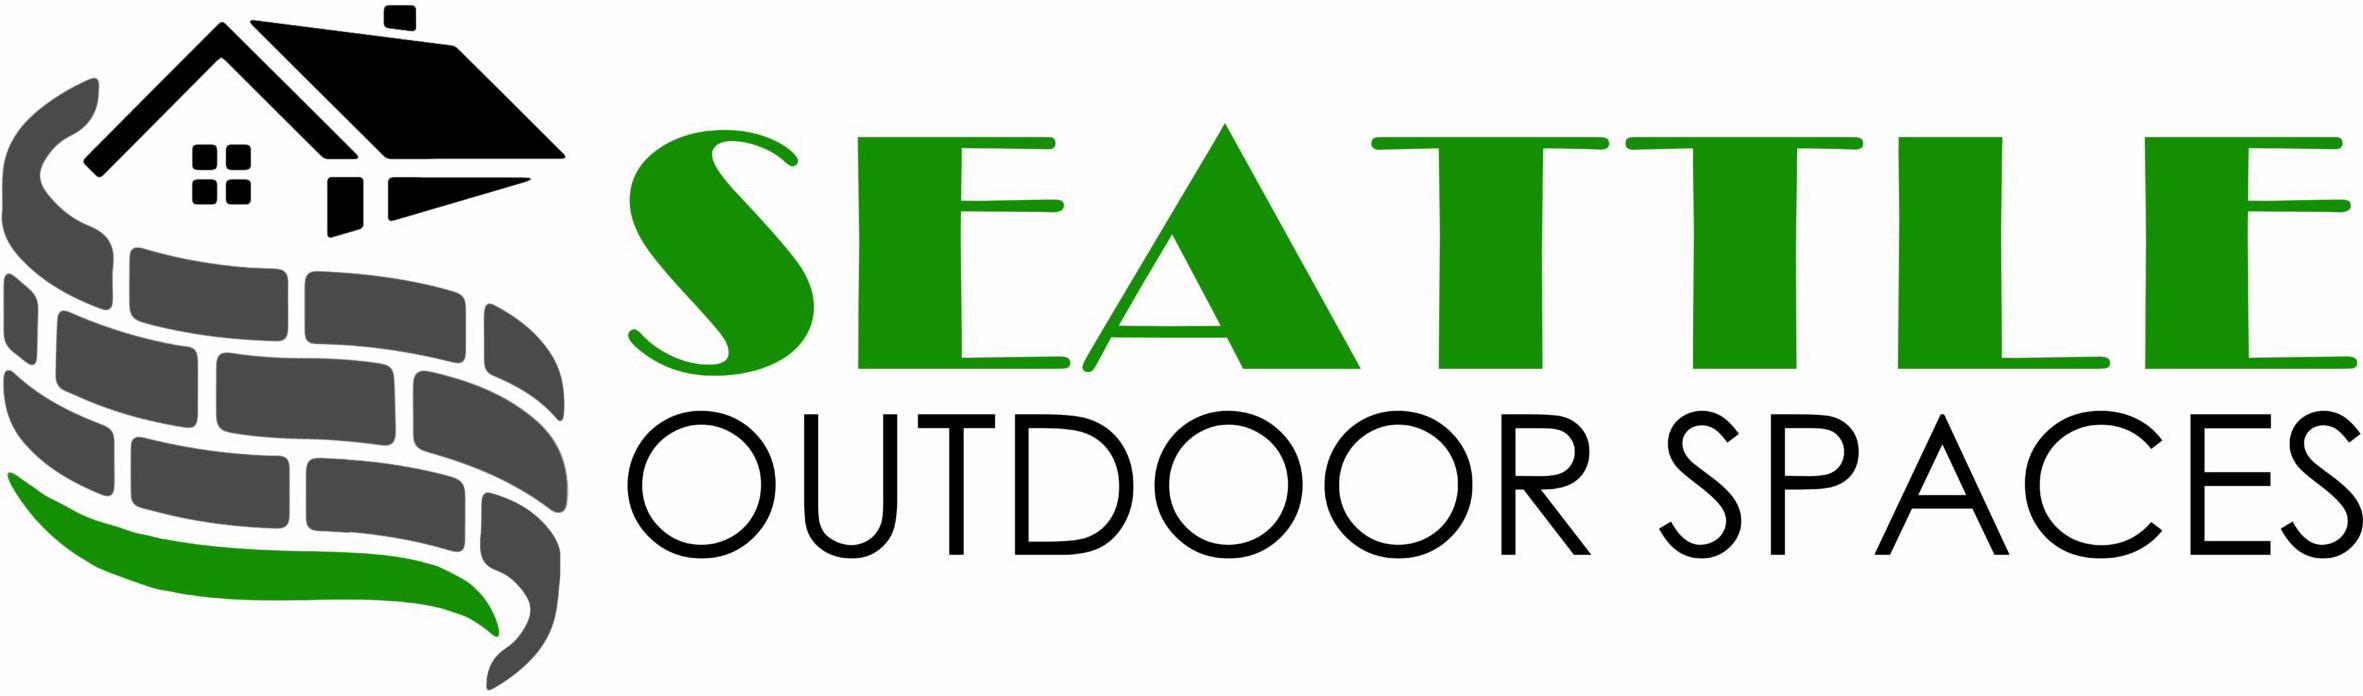 Seattle Outdoor Spaces Logo